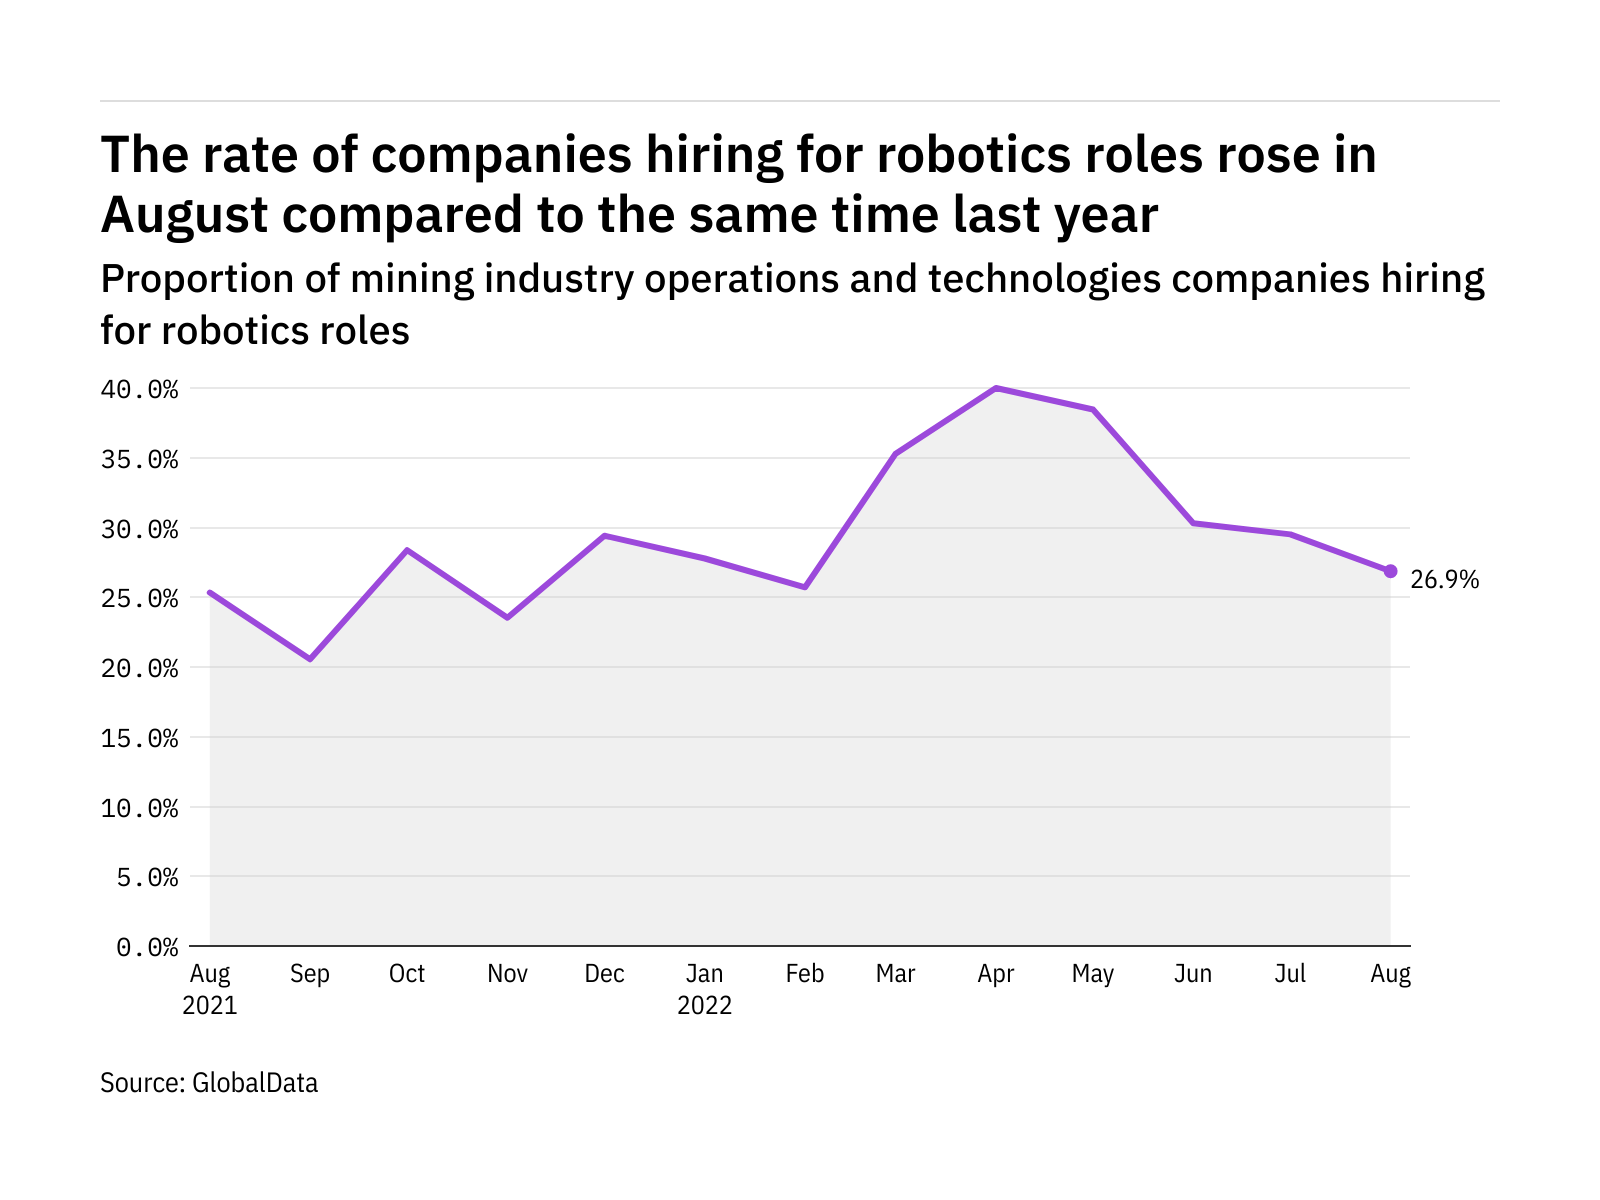 Robotics hiring levels in the mining industry rose in August 2022